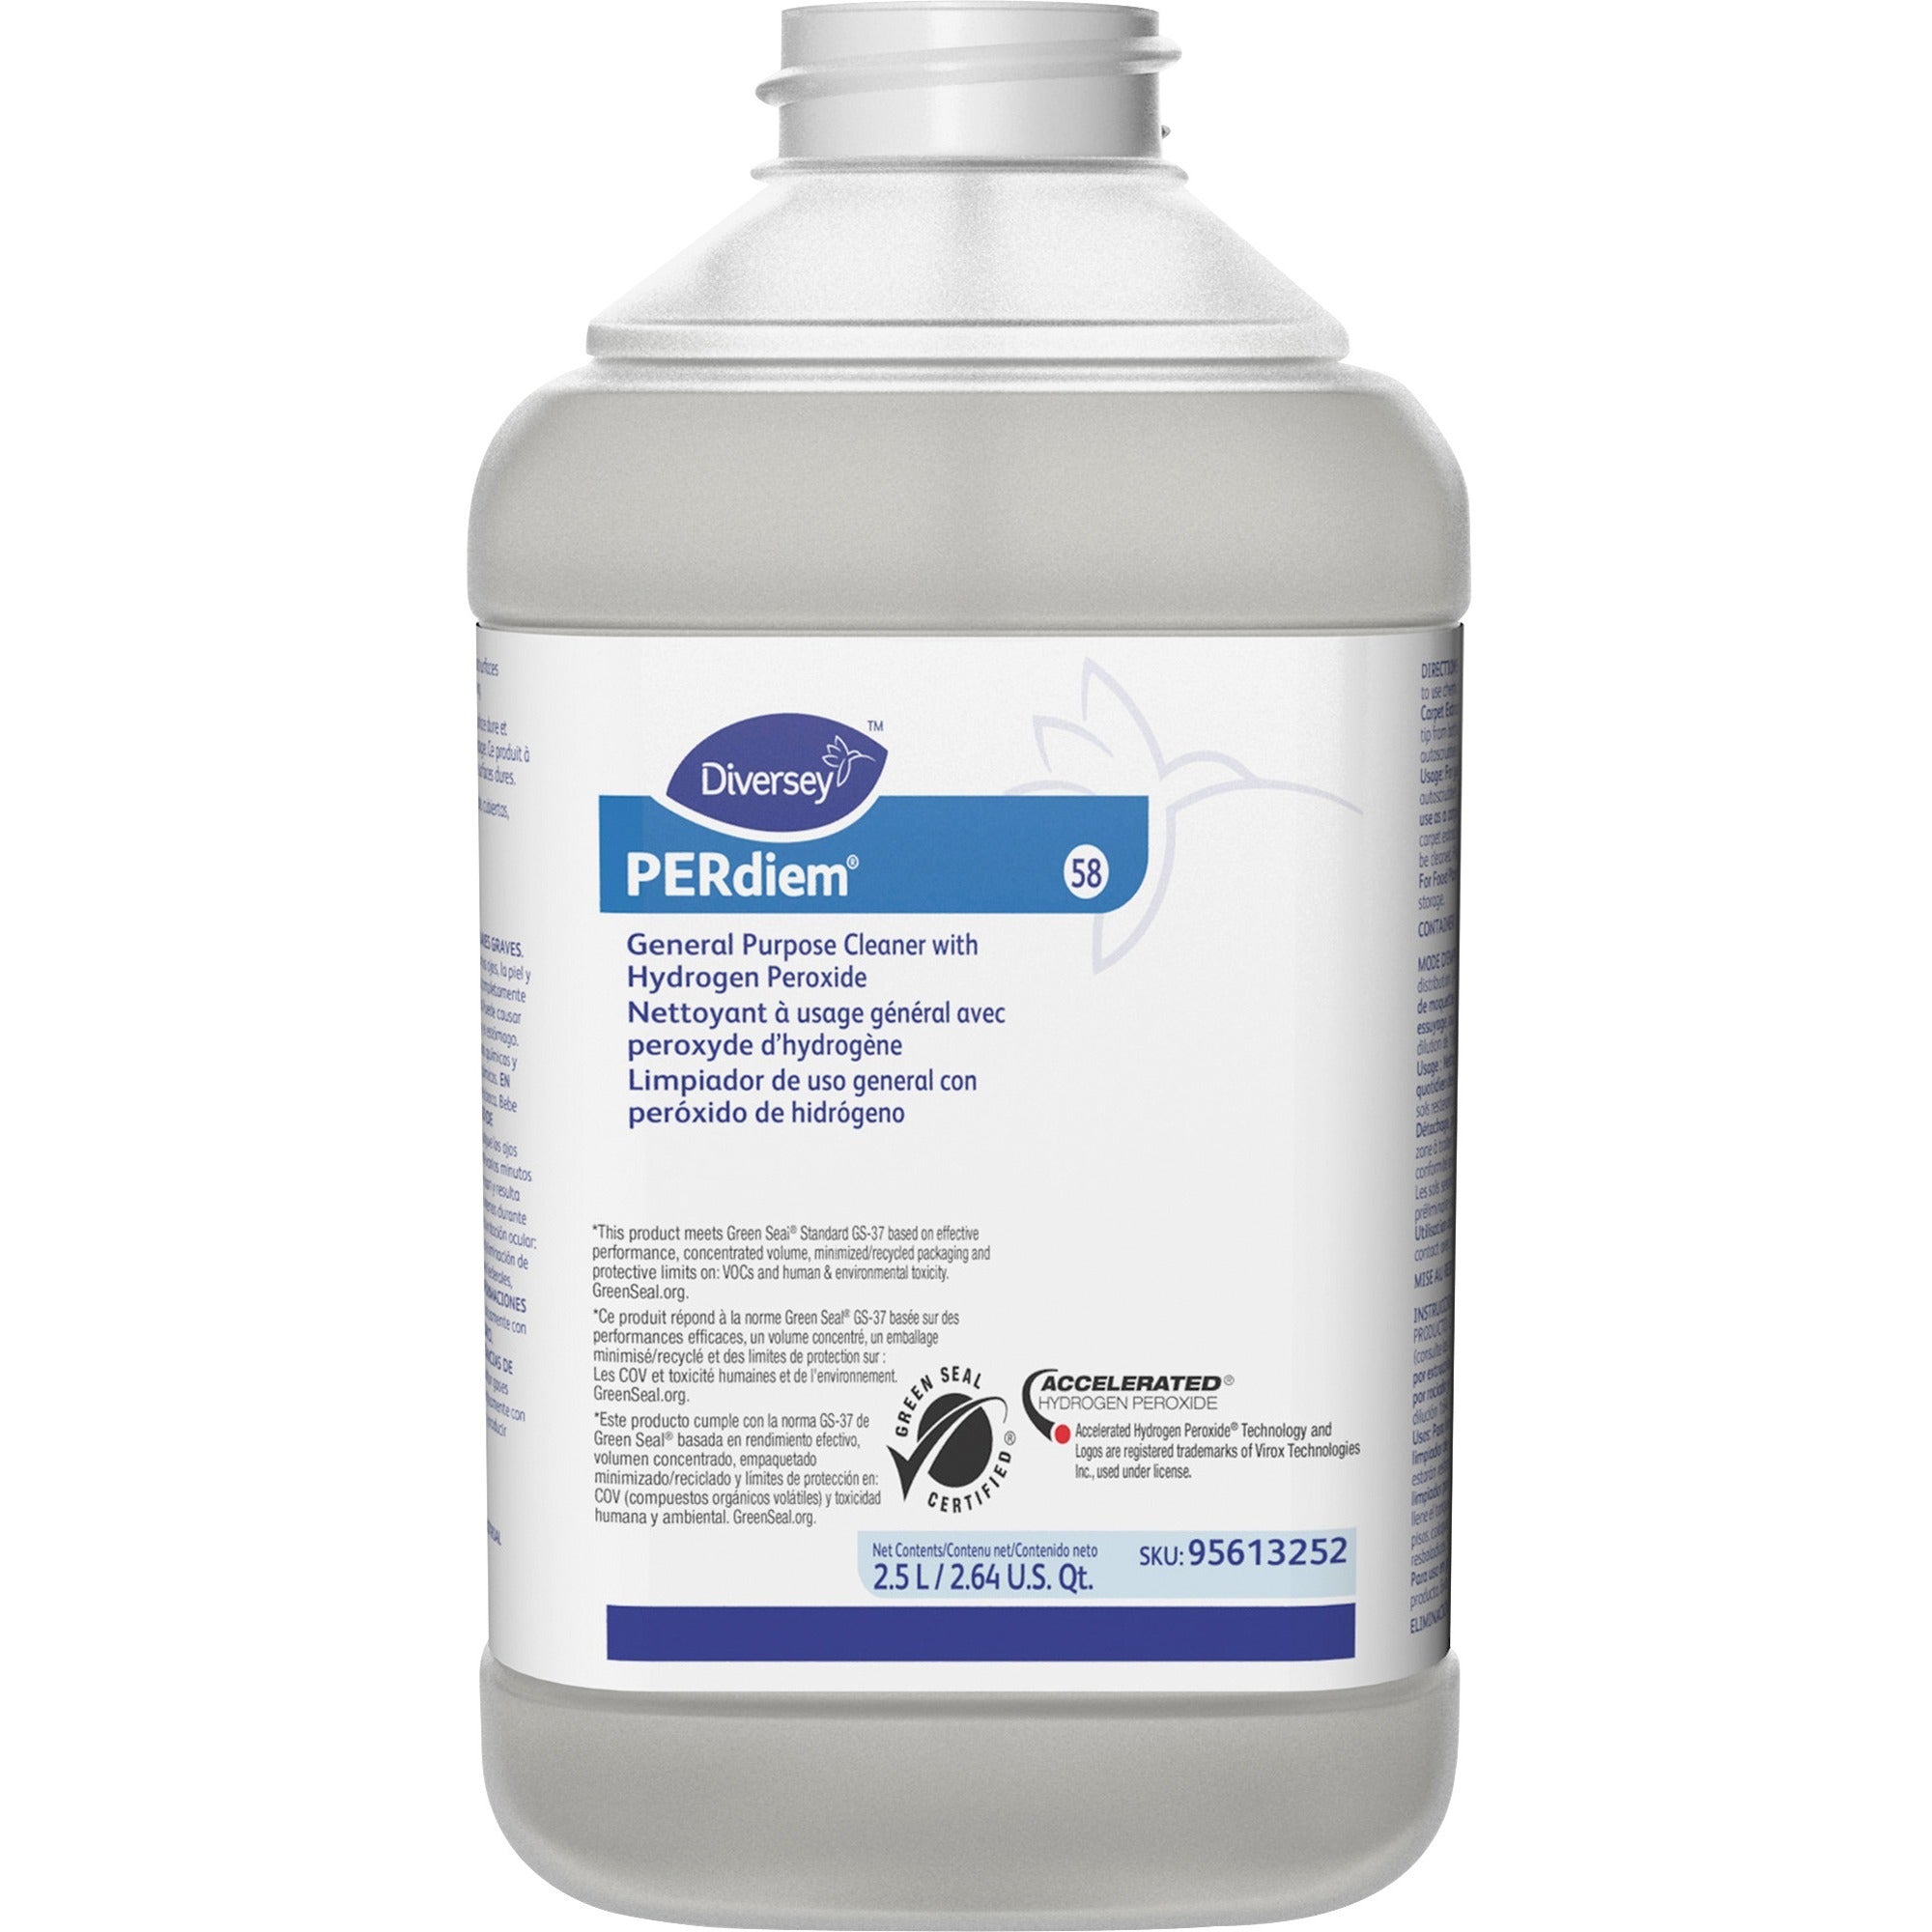 perdiem-general-purpose-cleaner-with-hydrogen-peroxide-concentrate-845-fl-oz-26-quartbottle-2-carton-heavy-duty-dilutable-phosphorous-free-odorless-color-free-dye-free-fragrance-free-kosher-clear_dvo95613252ct - 2